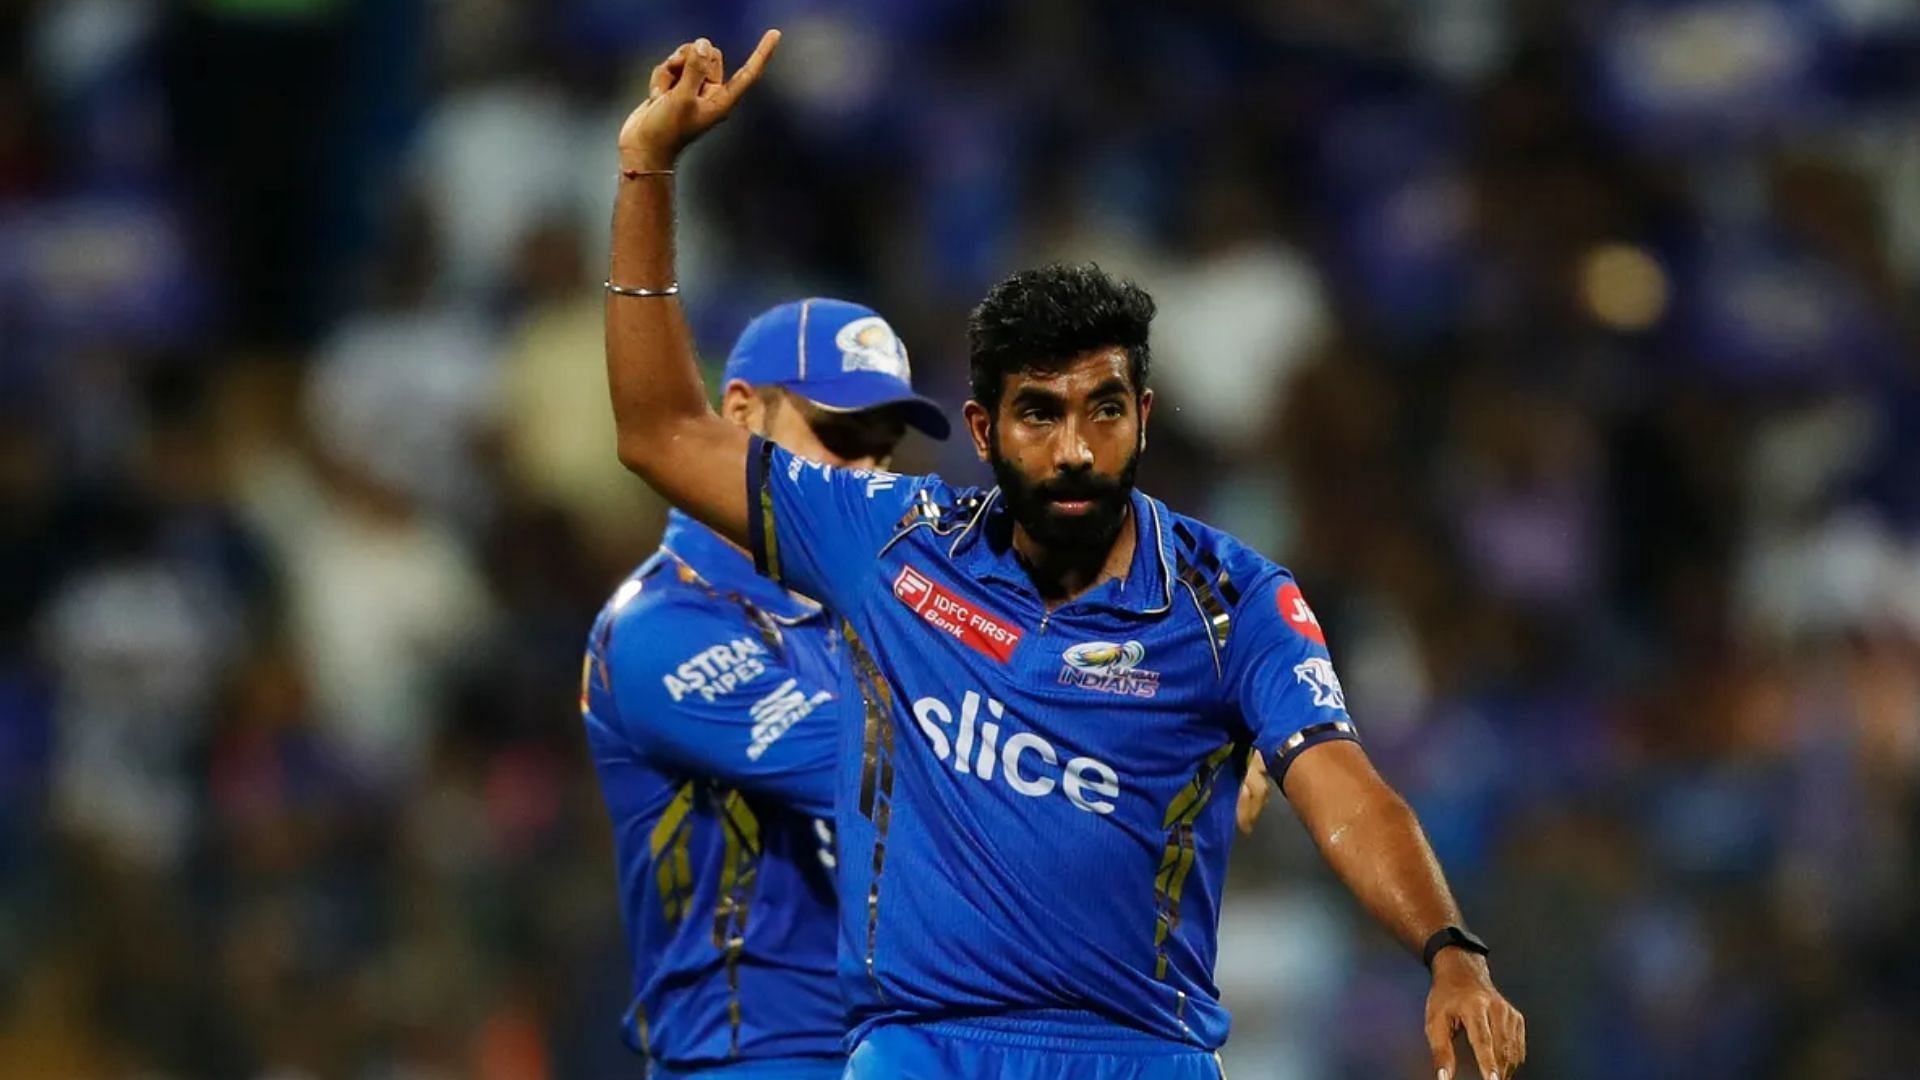 Jasprit Bumrah is fresh off a five-wicket haul against RCB